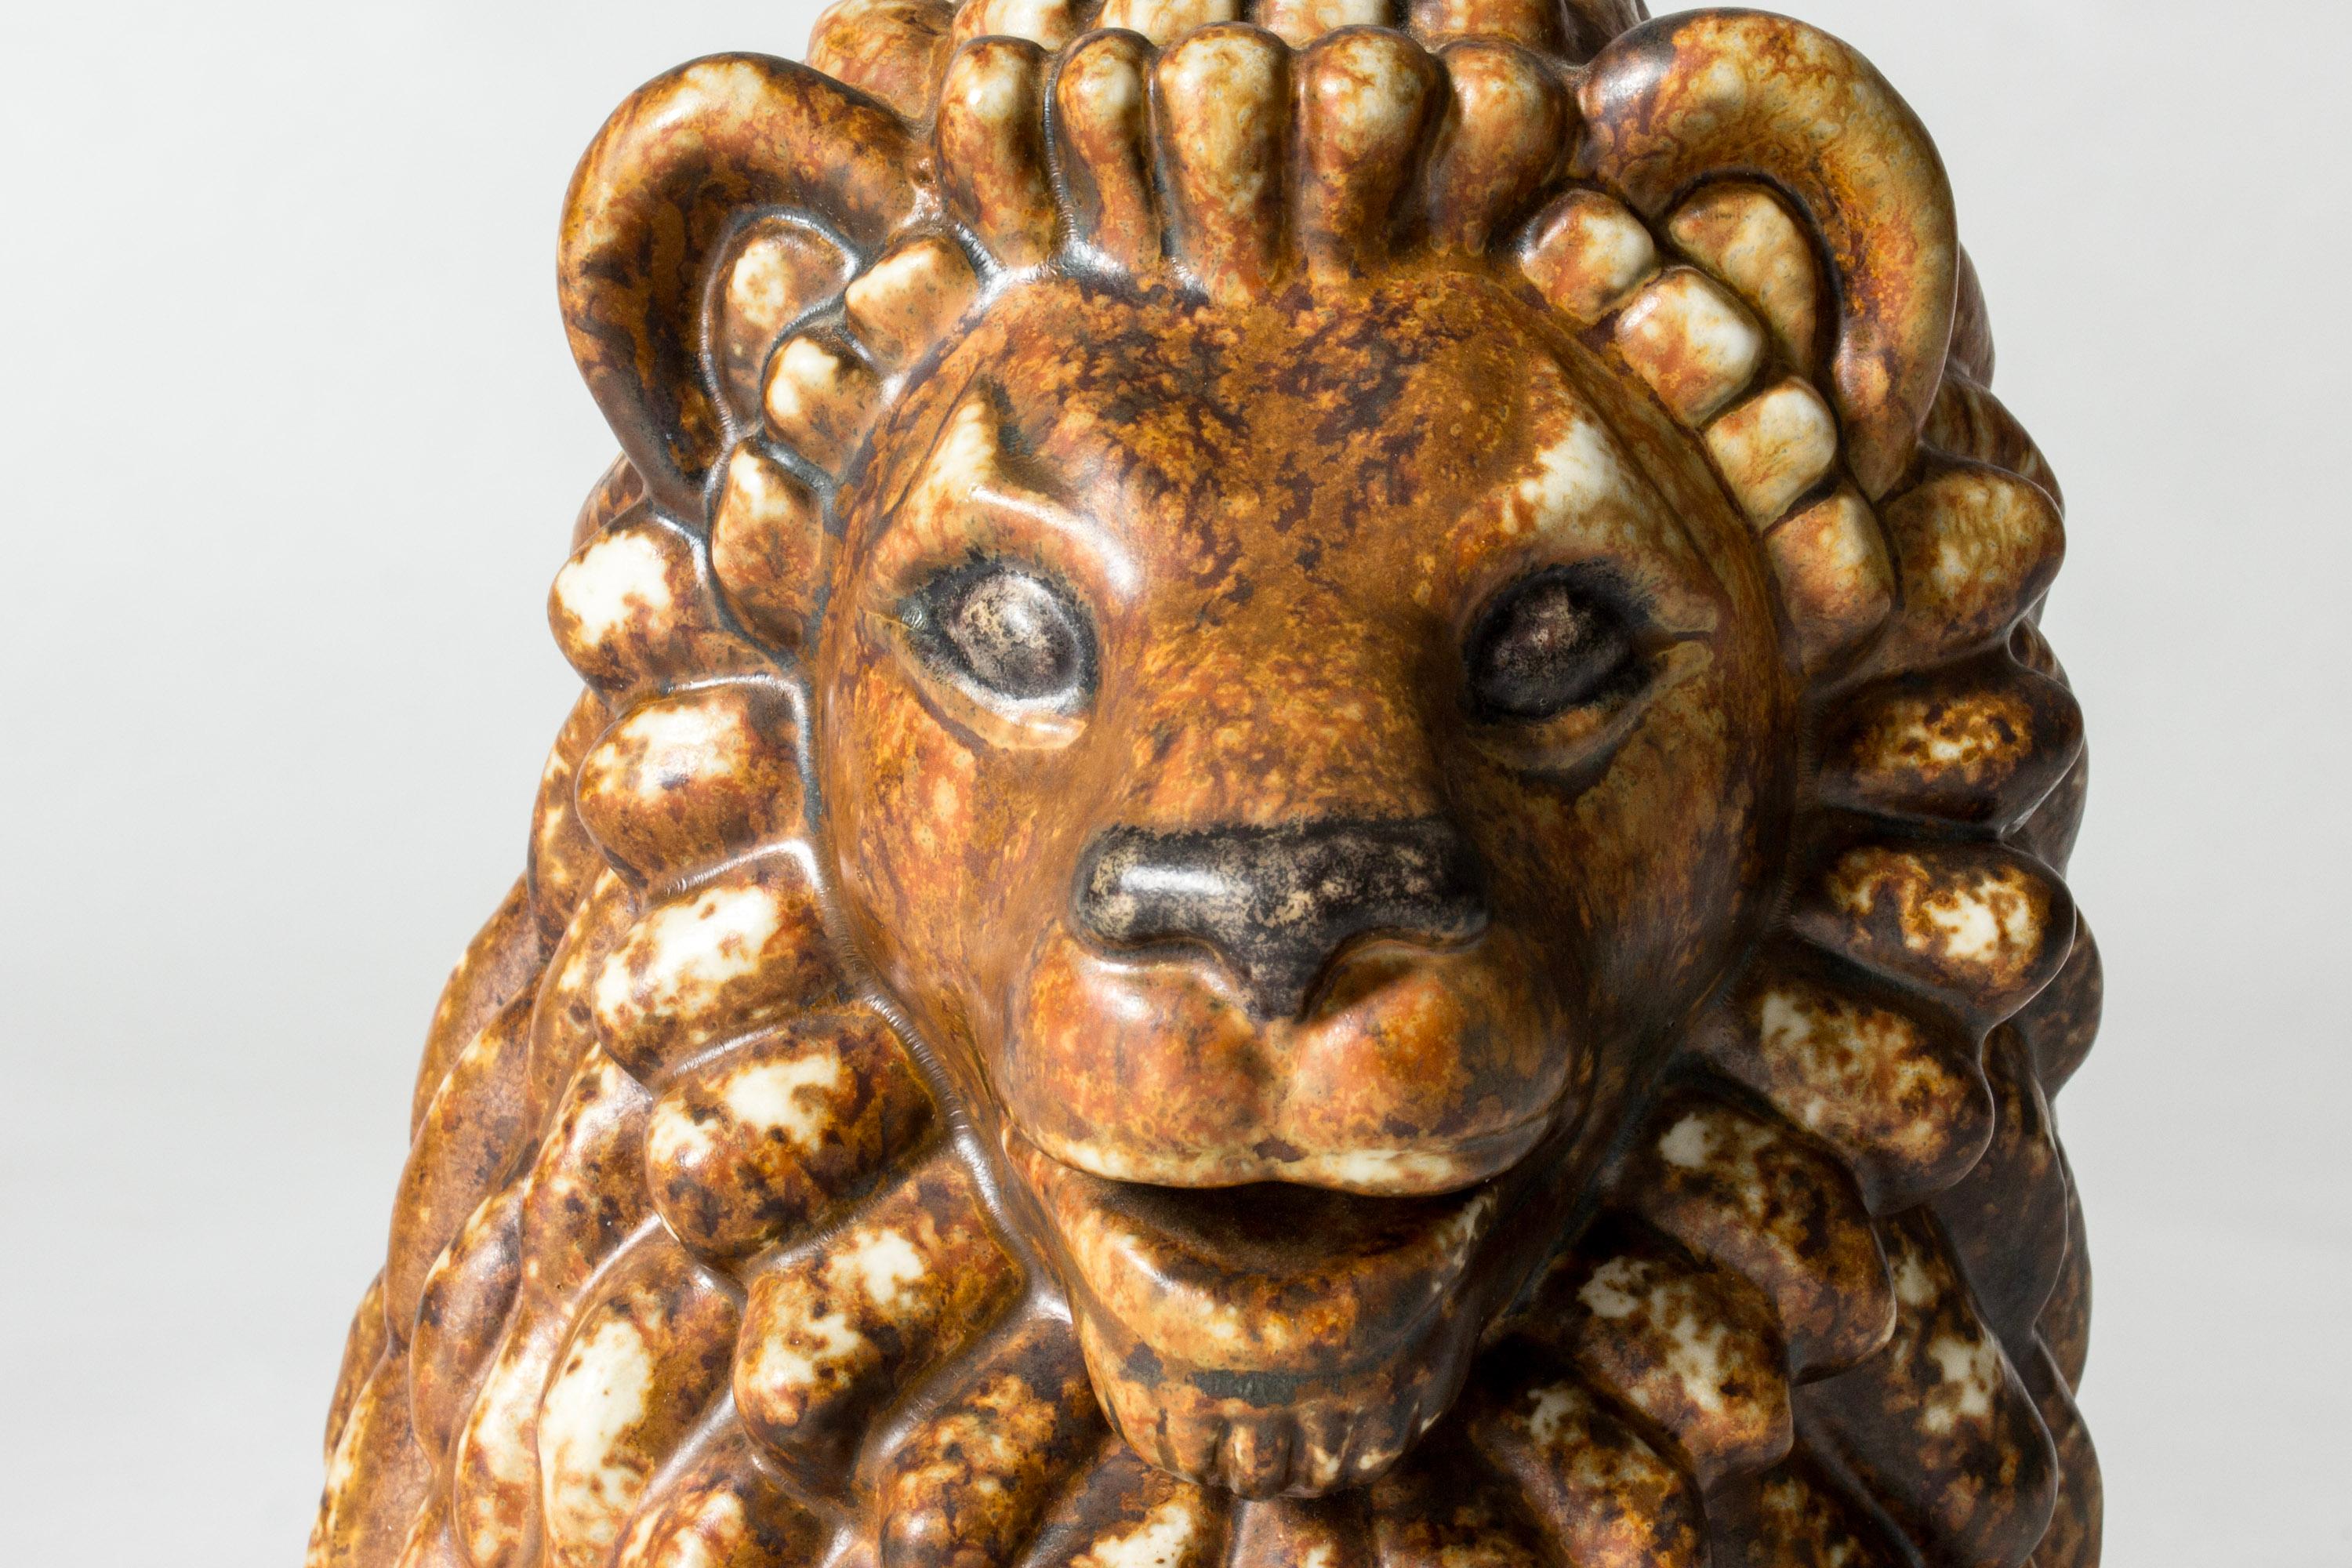 Gorgeous stoneware lion figurine by Gunnar Nylund with an expressive face and glaze gathering beautifully in all its nooks and crannies. Gunnar Nylund’s animal figurines are among his most loved creations, combining naturalistic and modernist